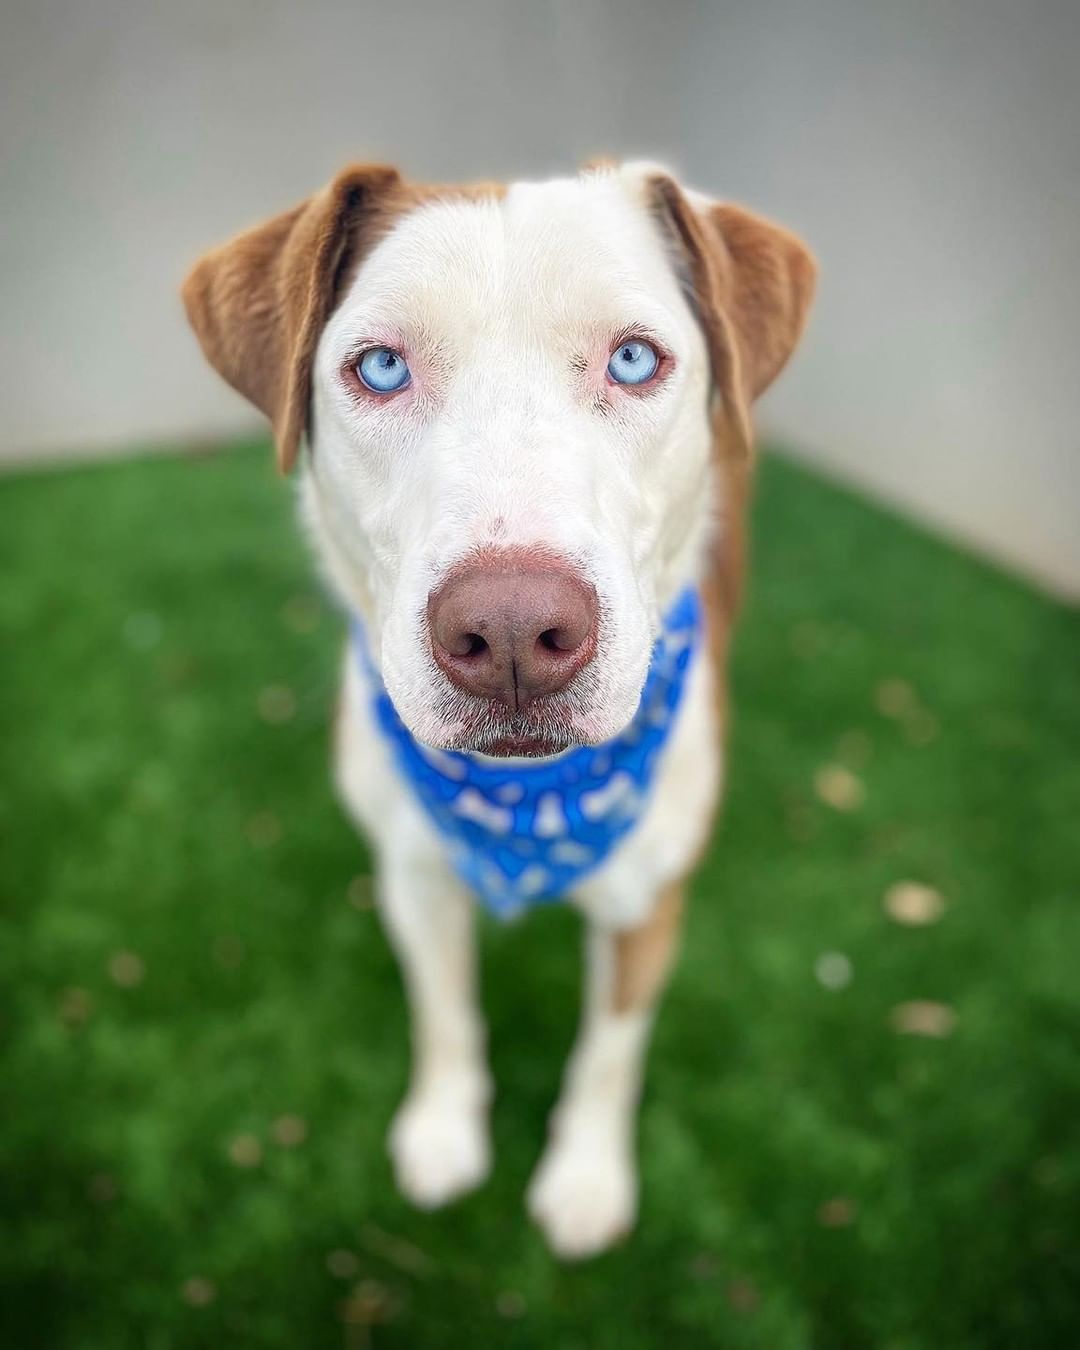 Wesley has been waiting 285 days to find his forever home 🥺

This sweet boy is a heart stealer! He is so much fun to be around and will play fetch however long you want! He is extremely smart and eager to learn new things. He would enjoy dogs parks, camping or even agility training! Wesley is great with other dogs and people, but is looking for a home without cats. 

A shelter environment can be so stressful for active dogs like Wesley, being cooped up for 22 hours a day. We are starting to see this take quite a toll on him and he needs a hero to get him out. 

So if you have been looking for that next adventure buddy, head on over to our website to submit an adoption application! 
www.hillcountryspca.com